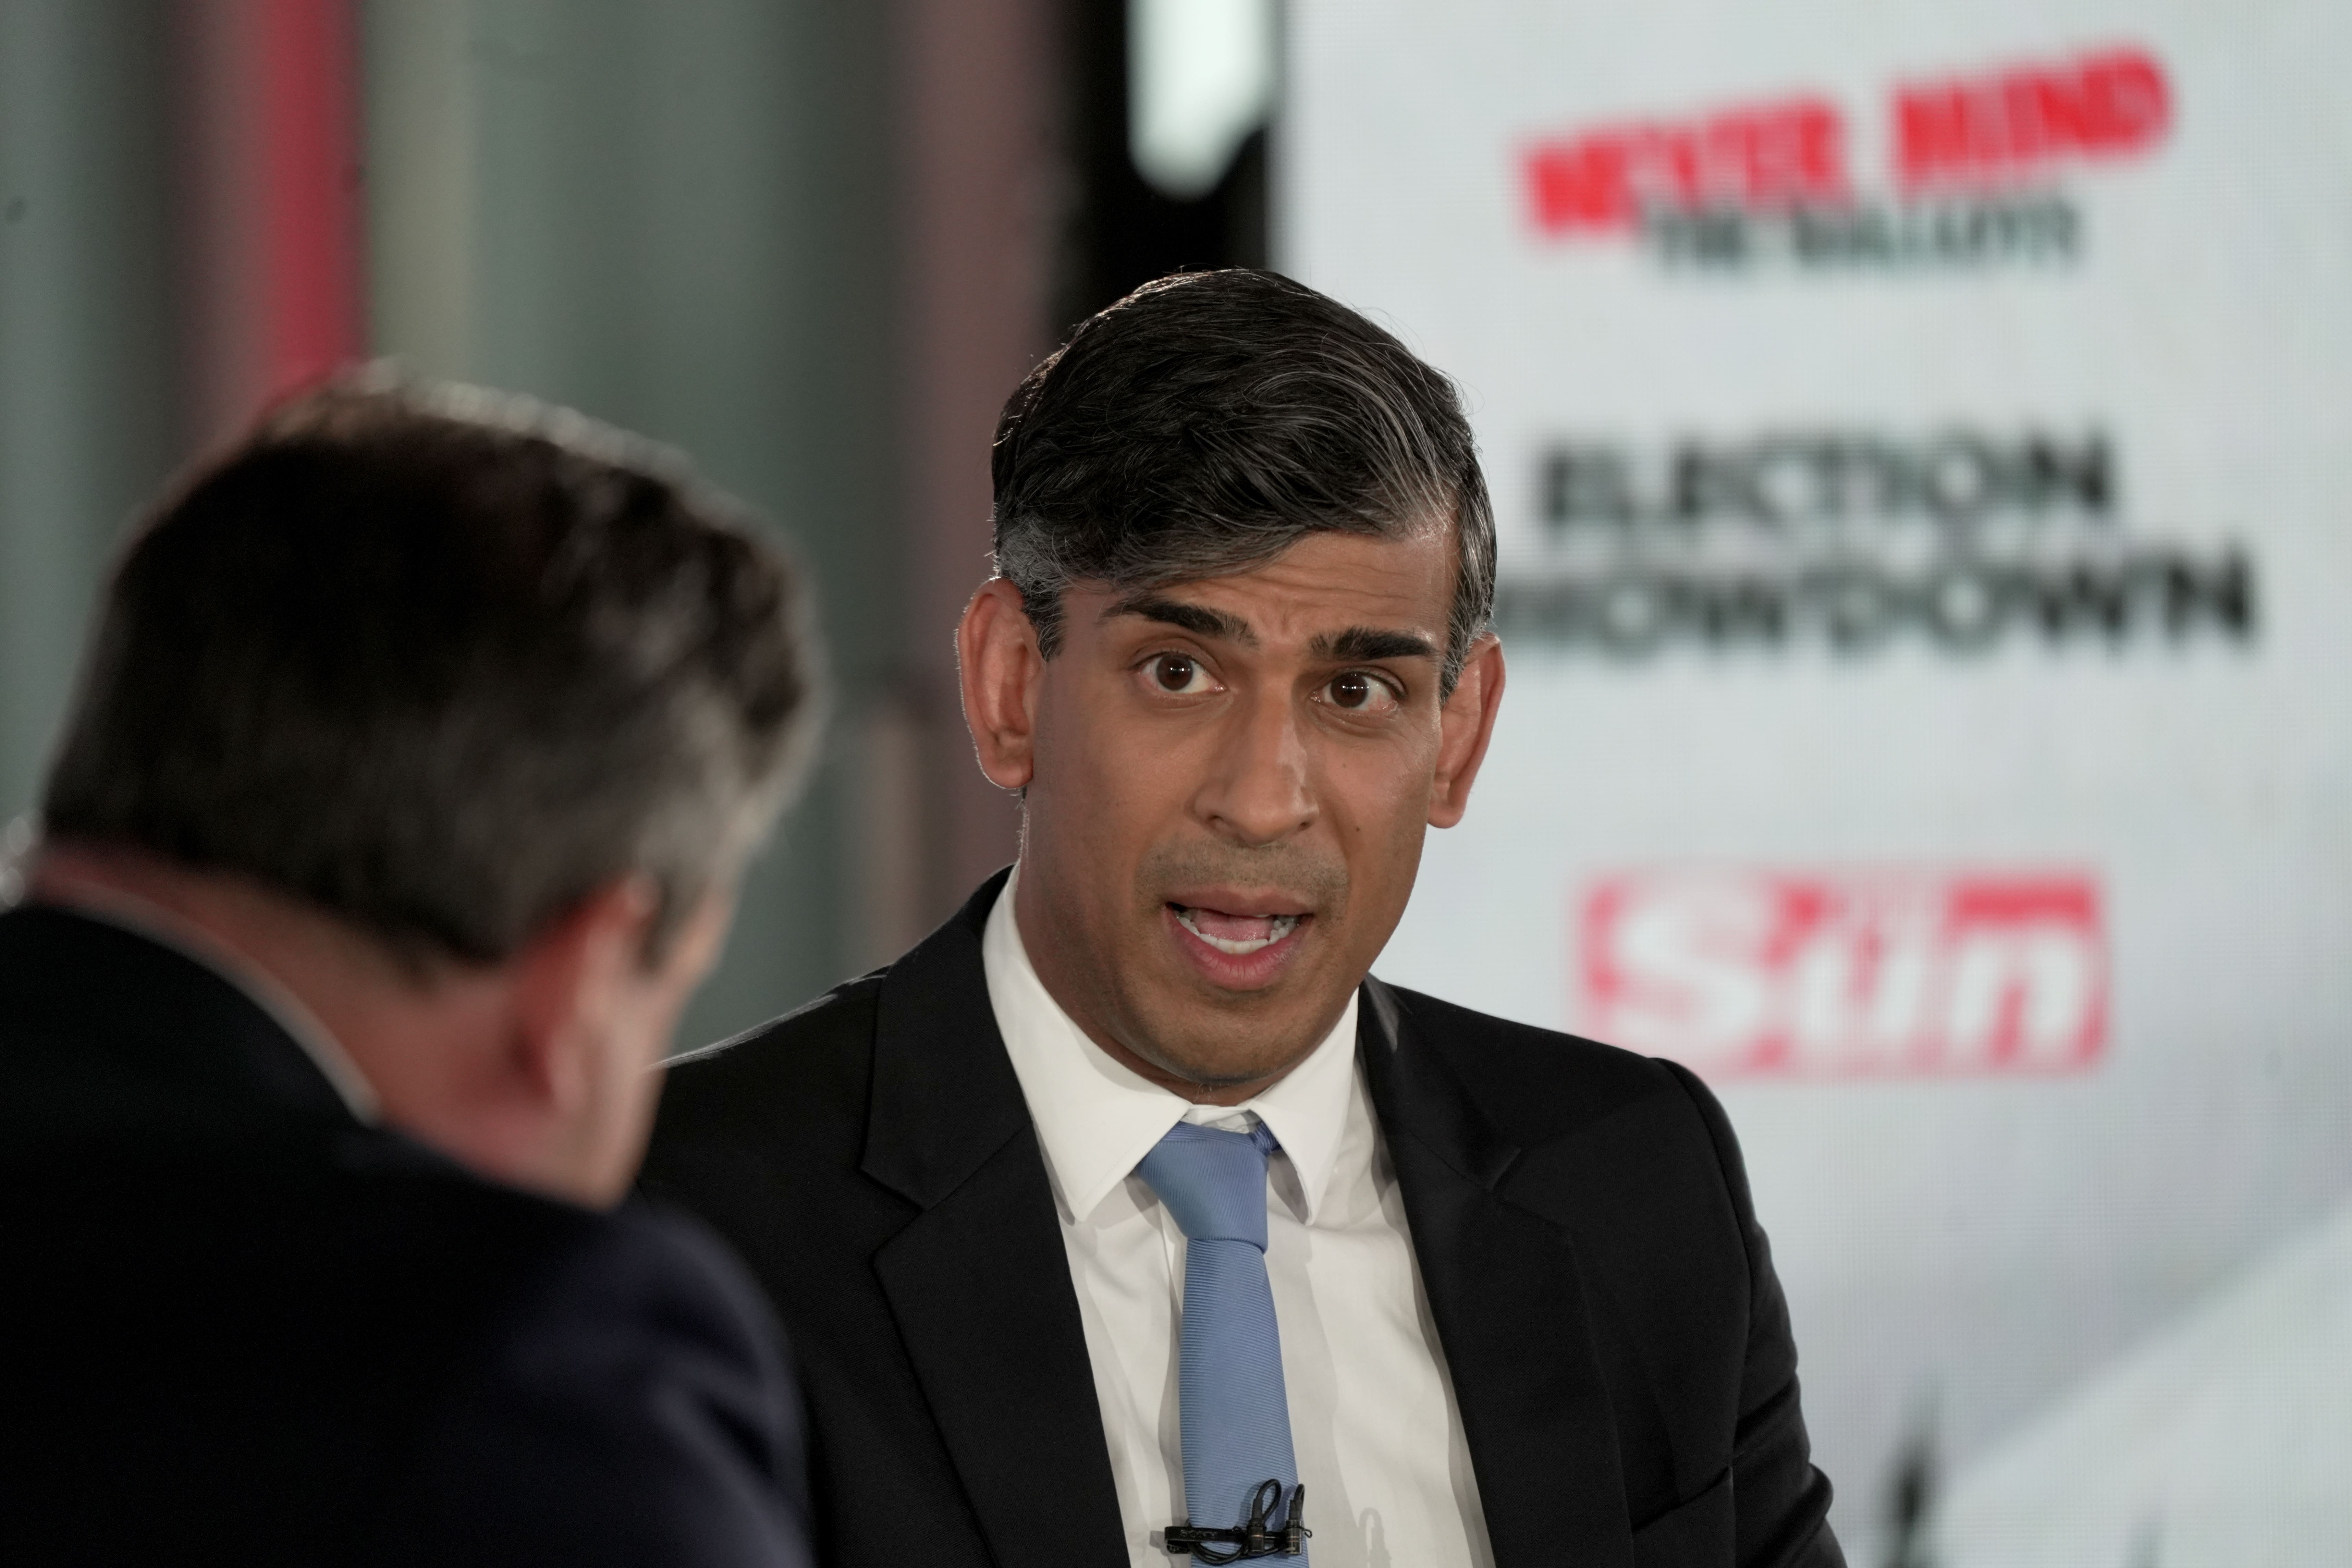 Rishi Sunak faced further questions about the gambling scandal as he appeared on The Sun’s Never Mind The Ballots show. (Dan Charity/The Sun)